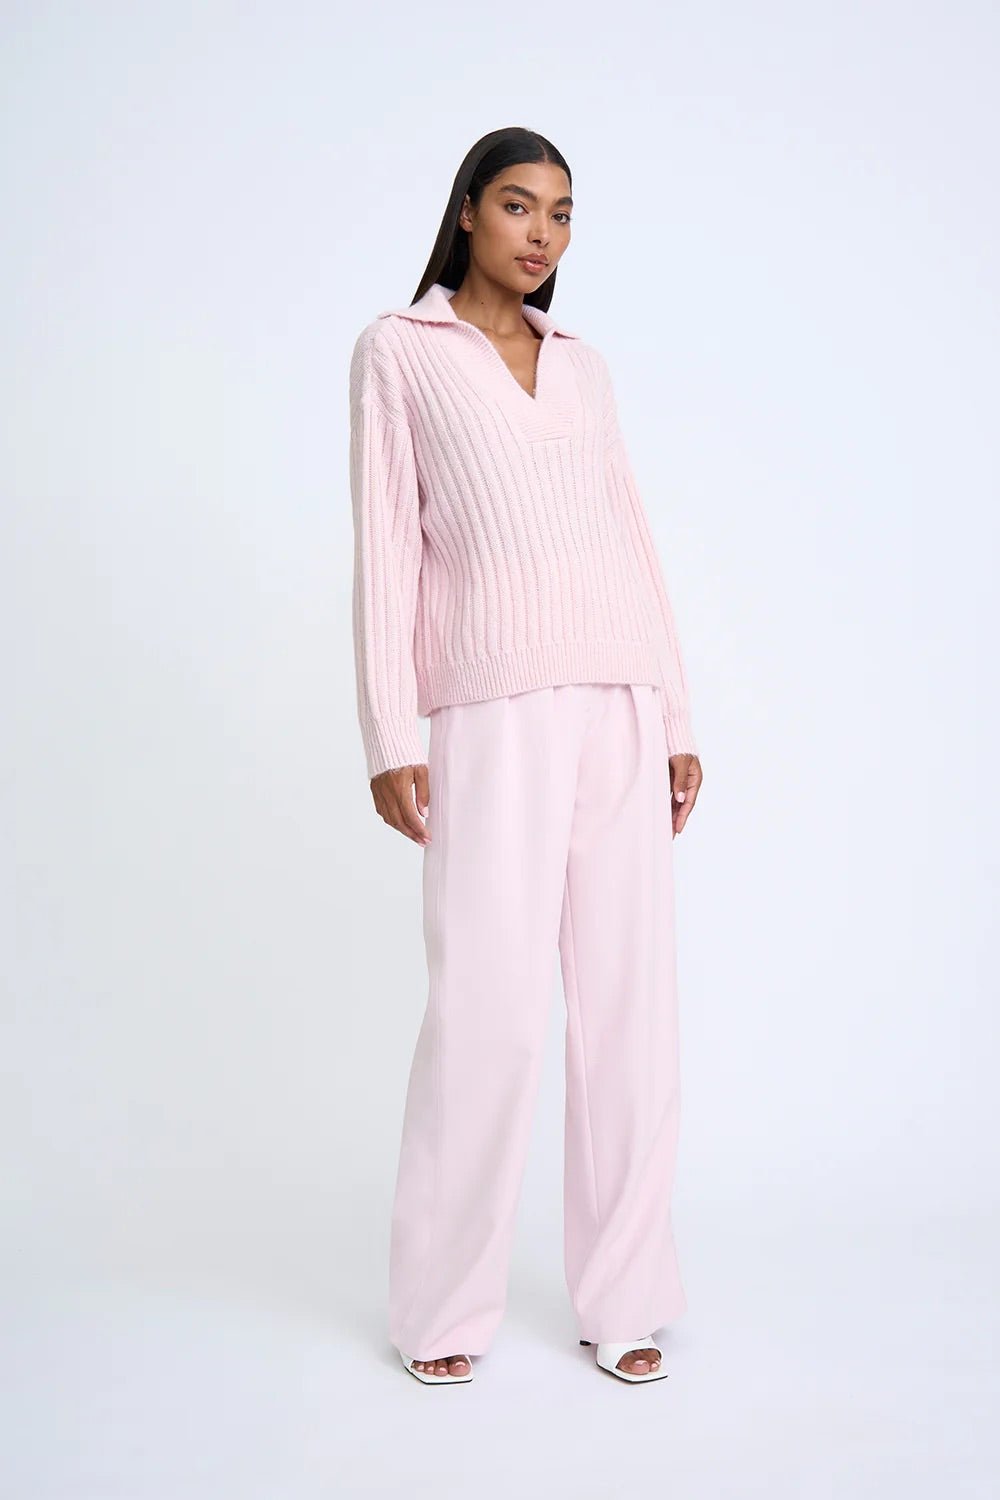 COSMIC KNIT SWEATER SOFT PINK - SUNDAY BEST TRADING CO